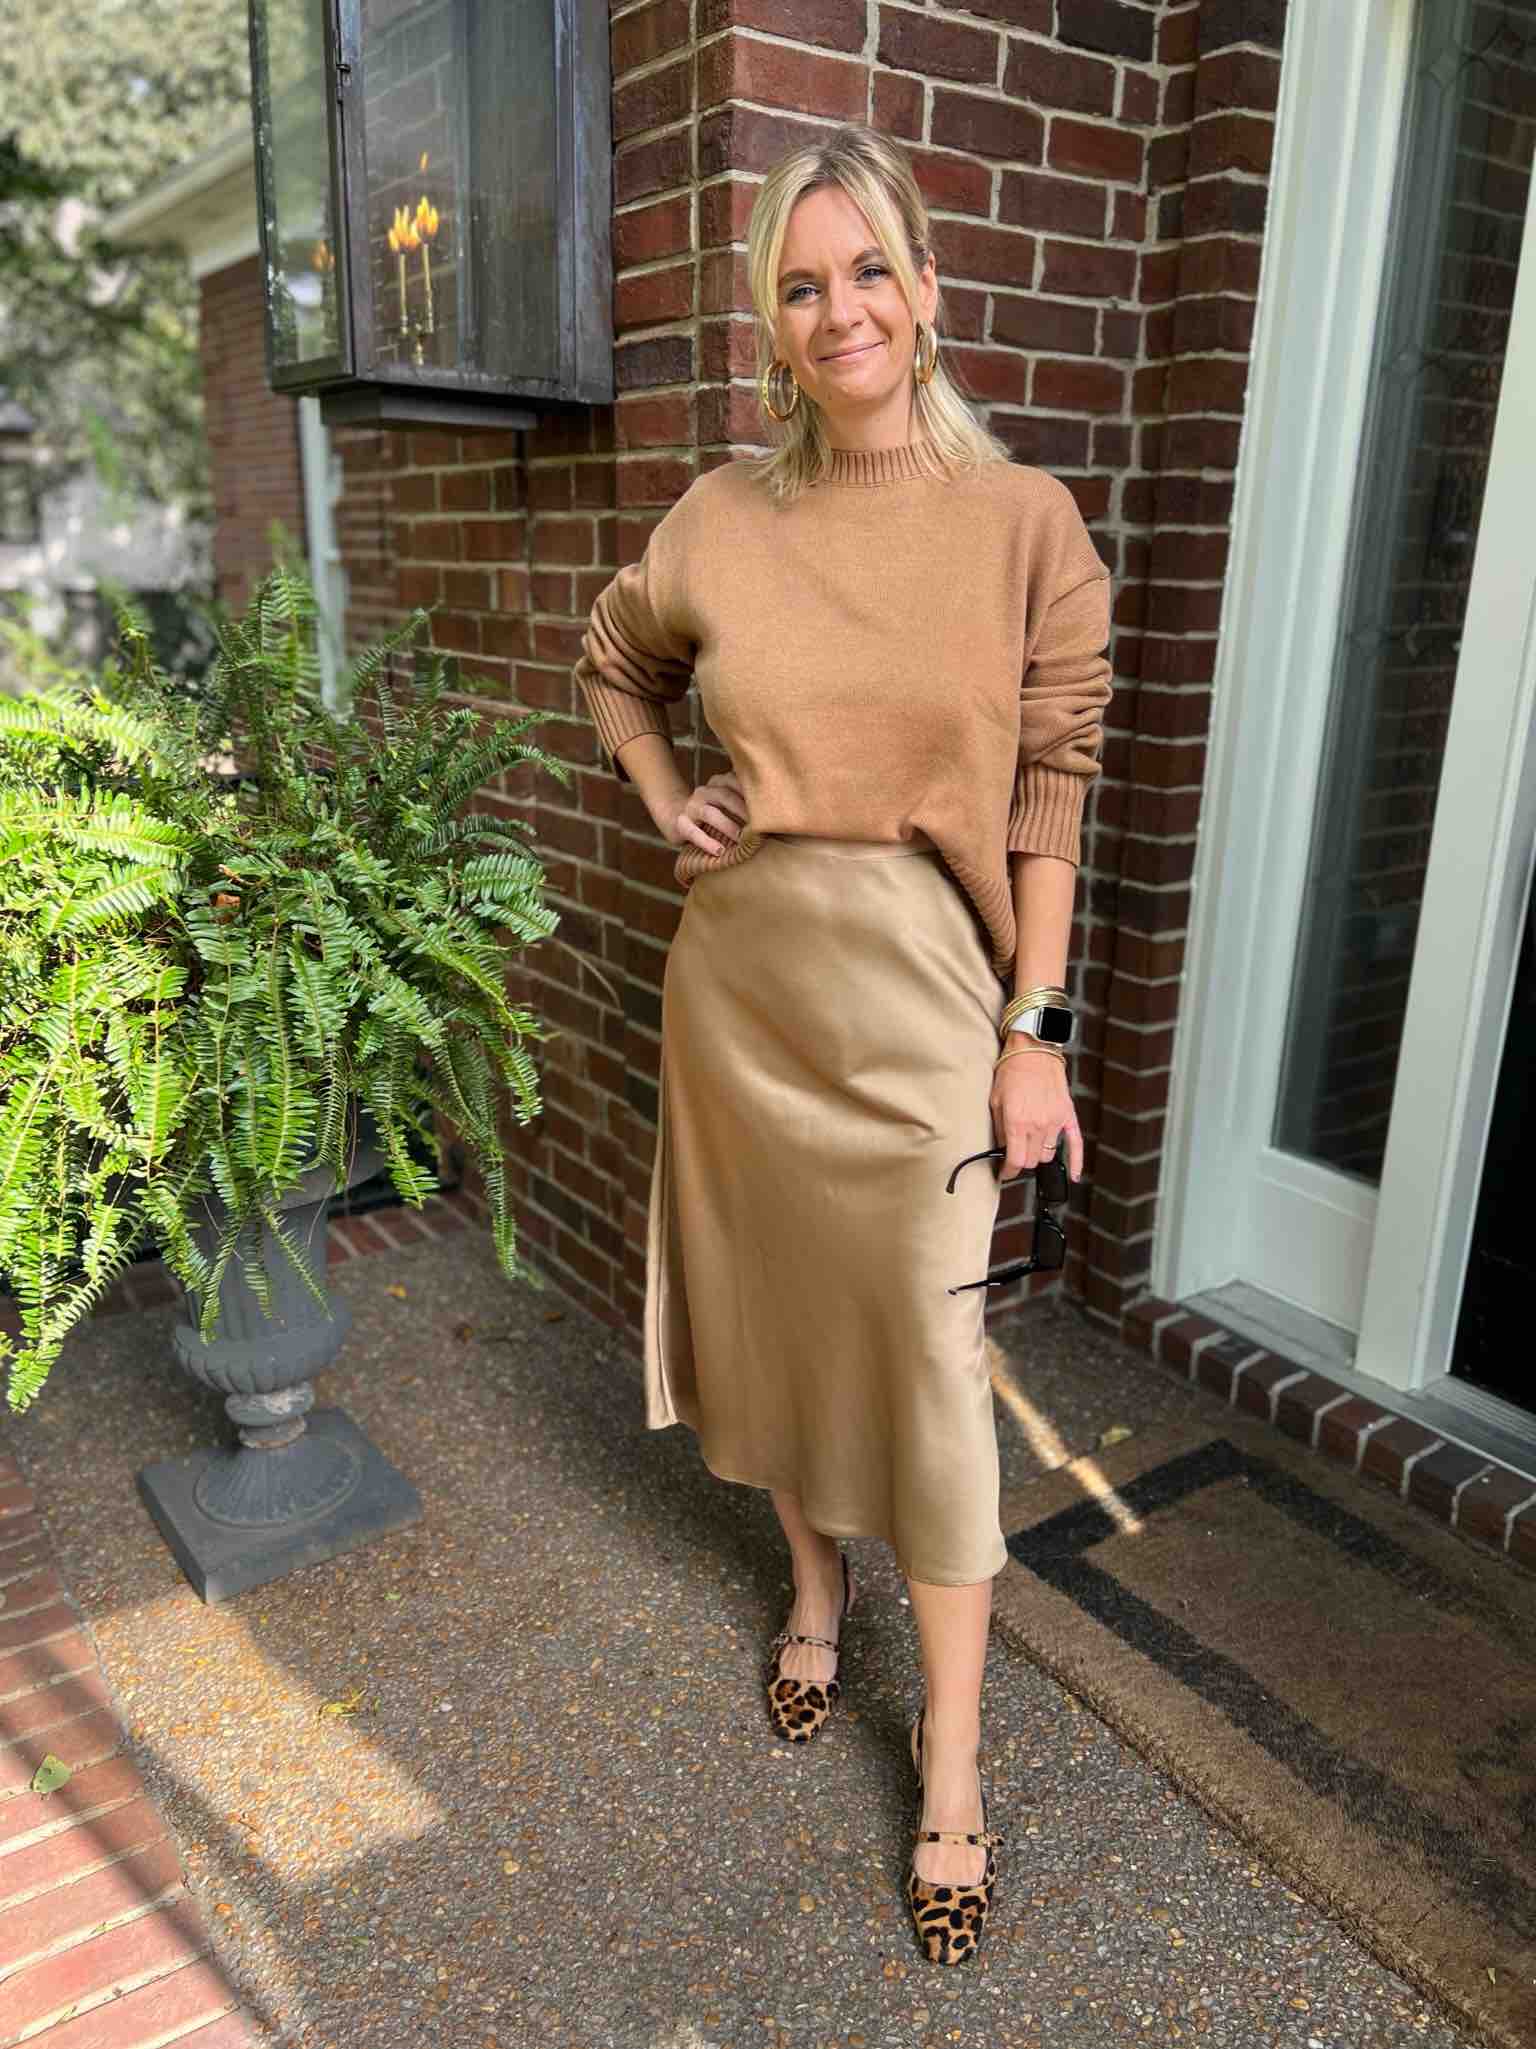 September Favorites From Our Nashville Personal Stylists Crewneck Sweater & Satin Slip Skirt personal stylists share the best slip skirt for fall how to style a slip skirt how to create a tone on tone look nashville stylists share must have fall pieces how to style a slip skirt